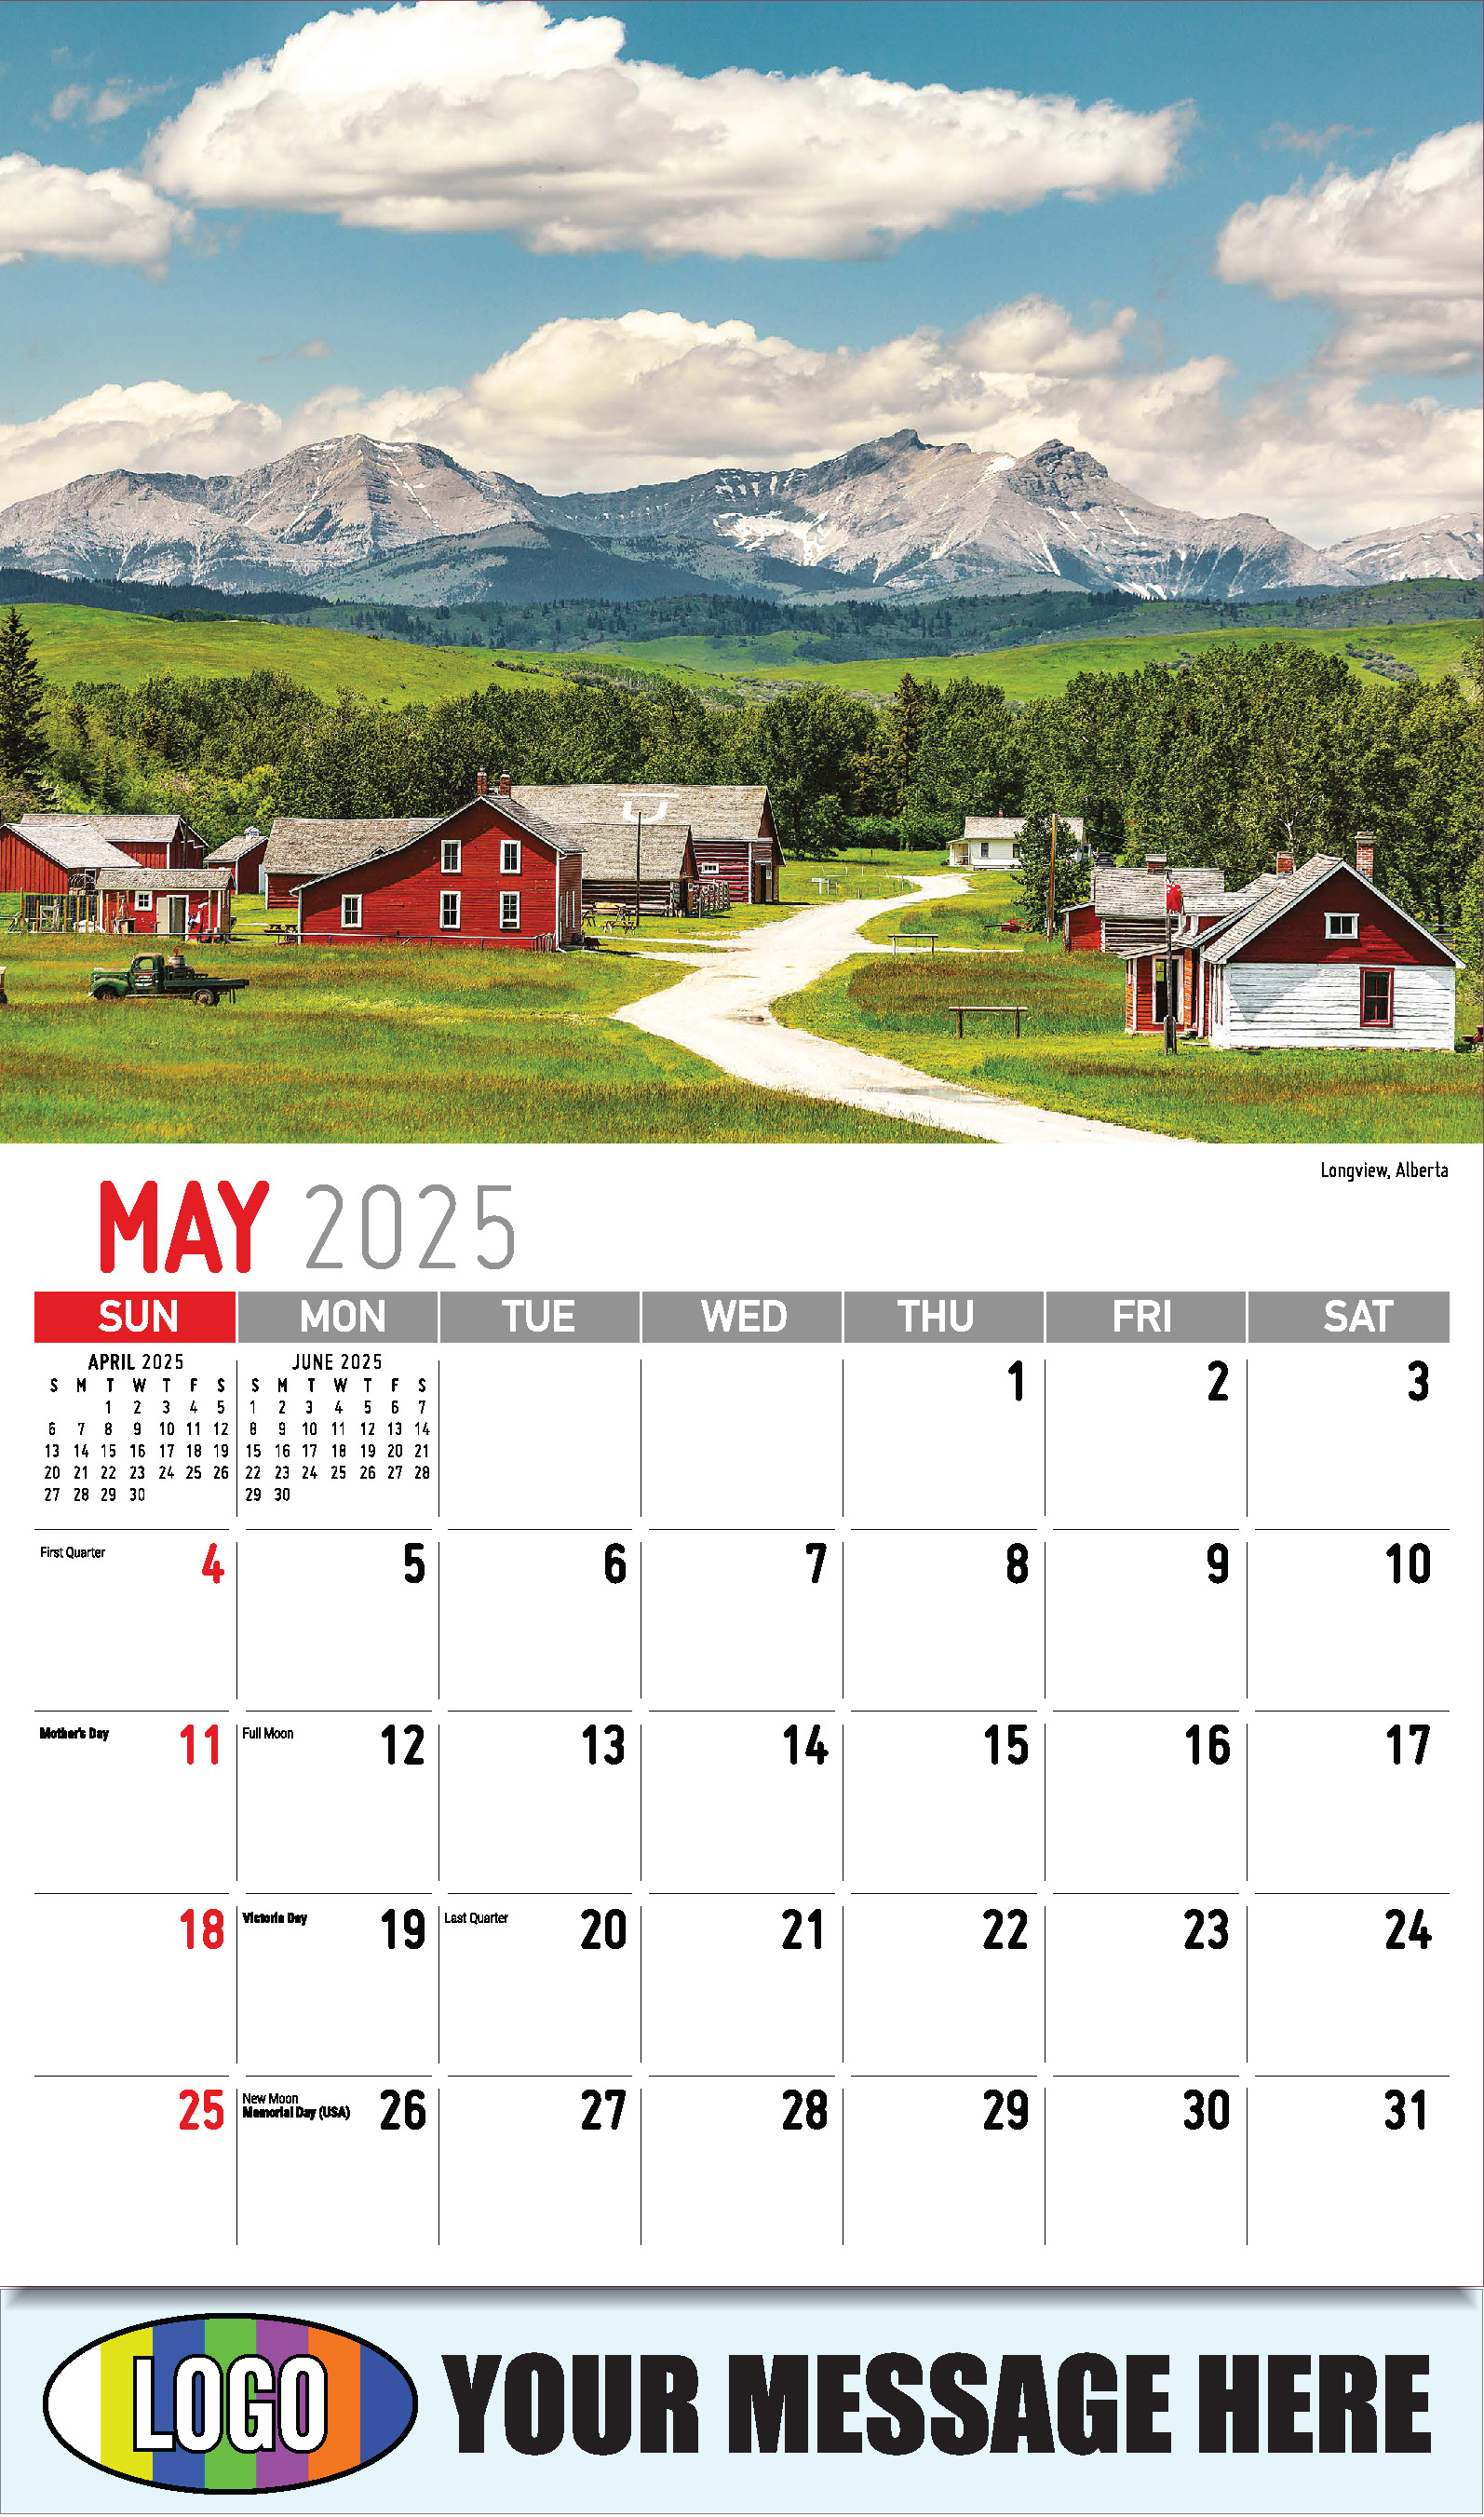 Scenes of Western Canada 2025 Business Promotional Wall Calendar - May